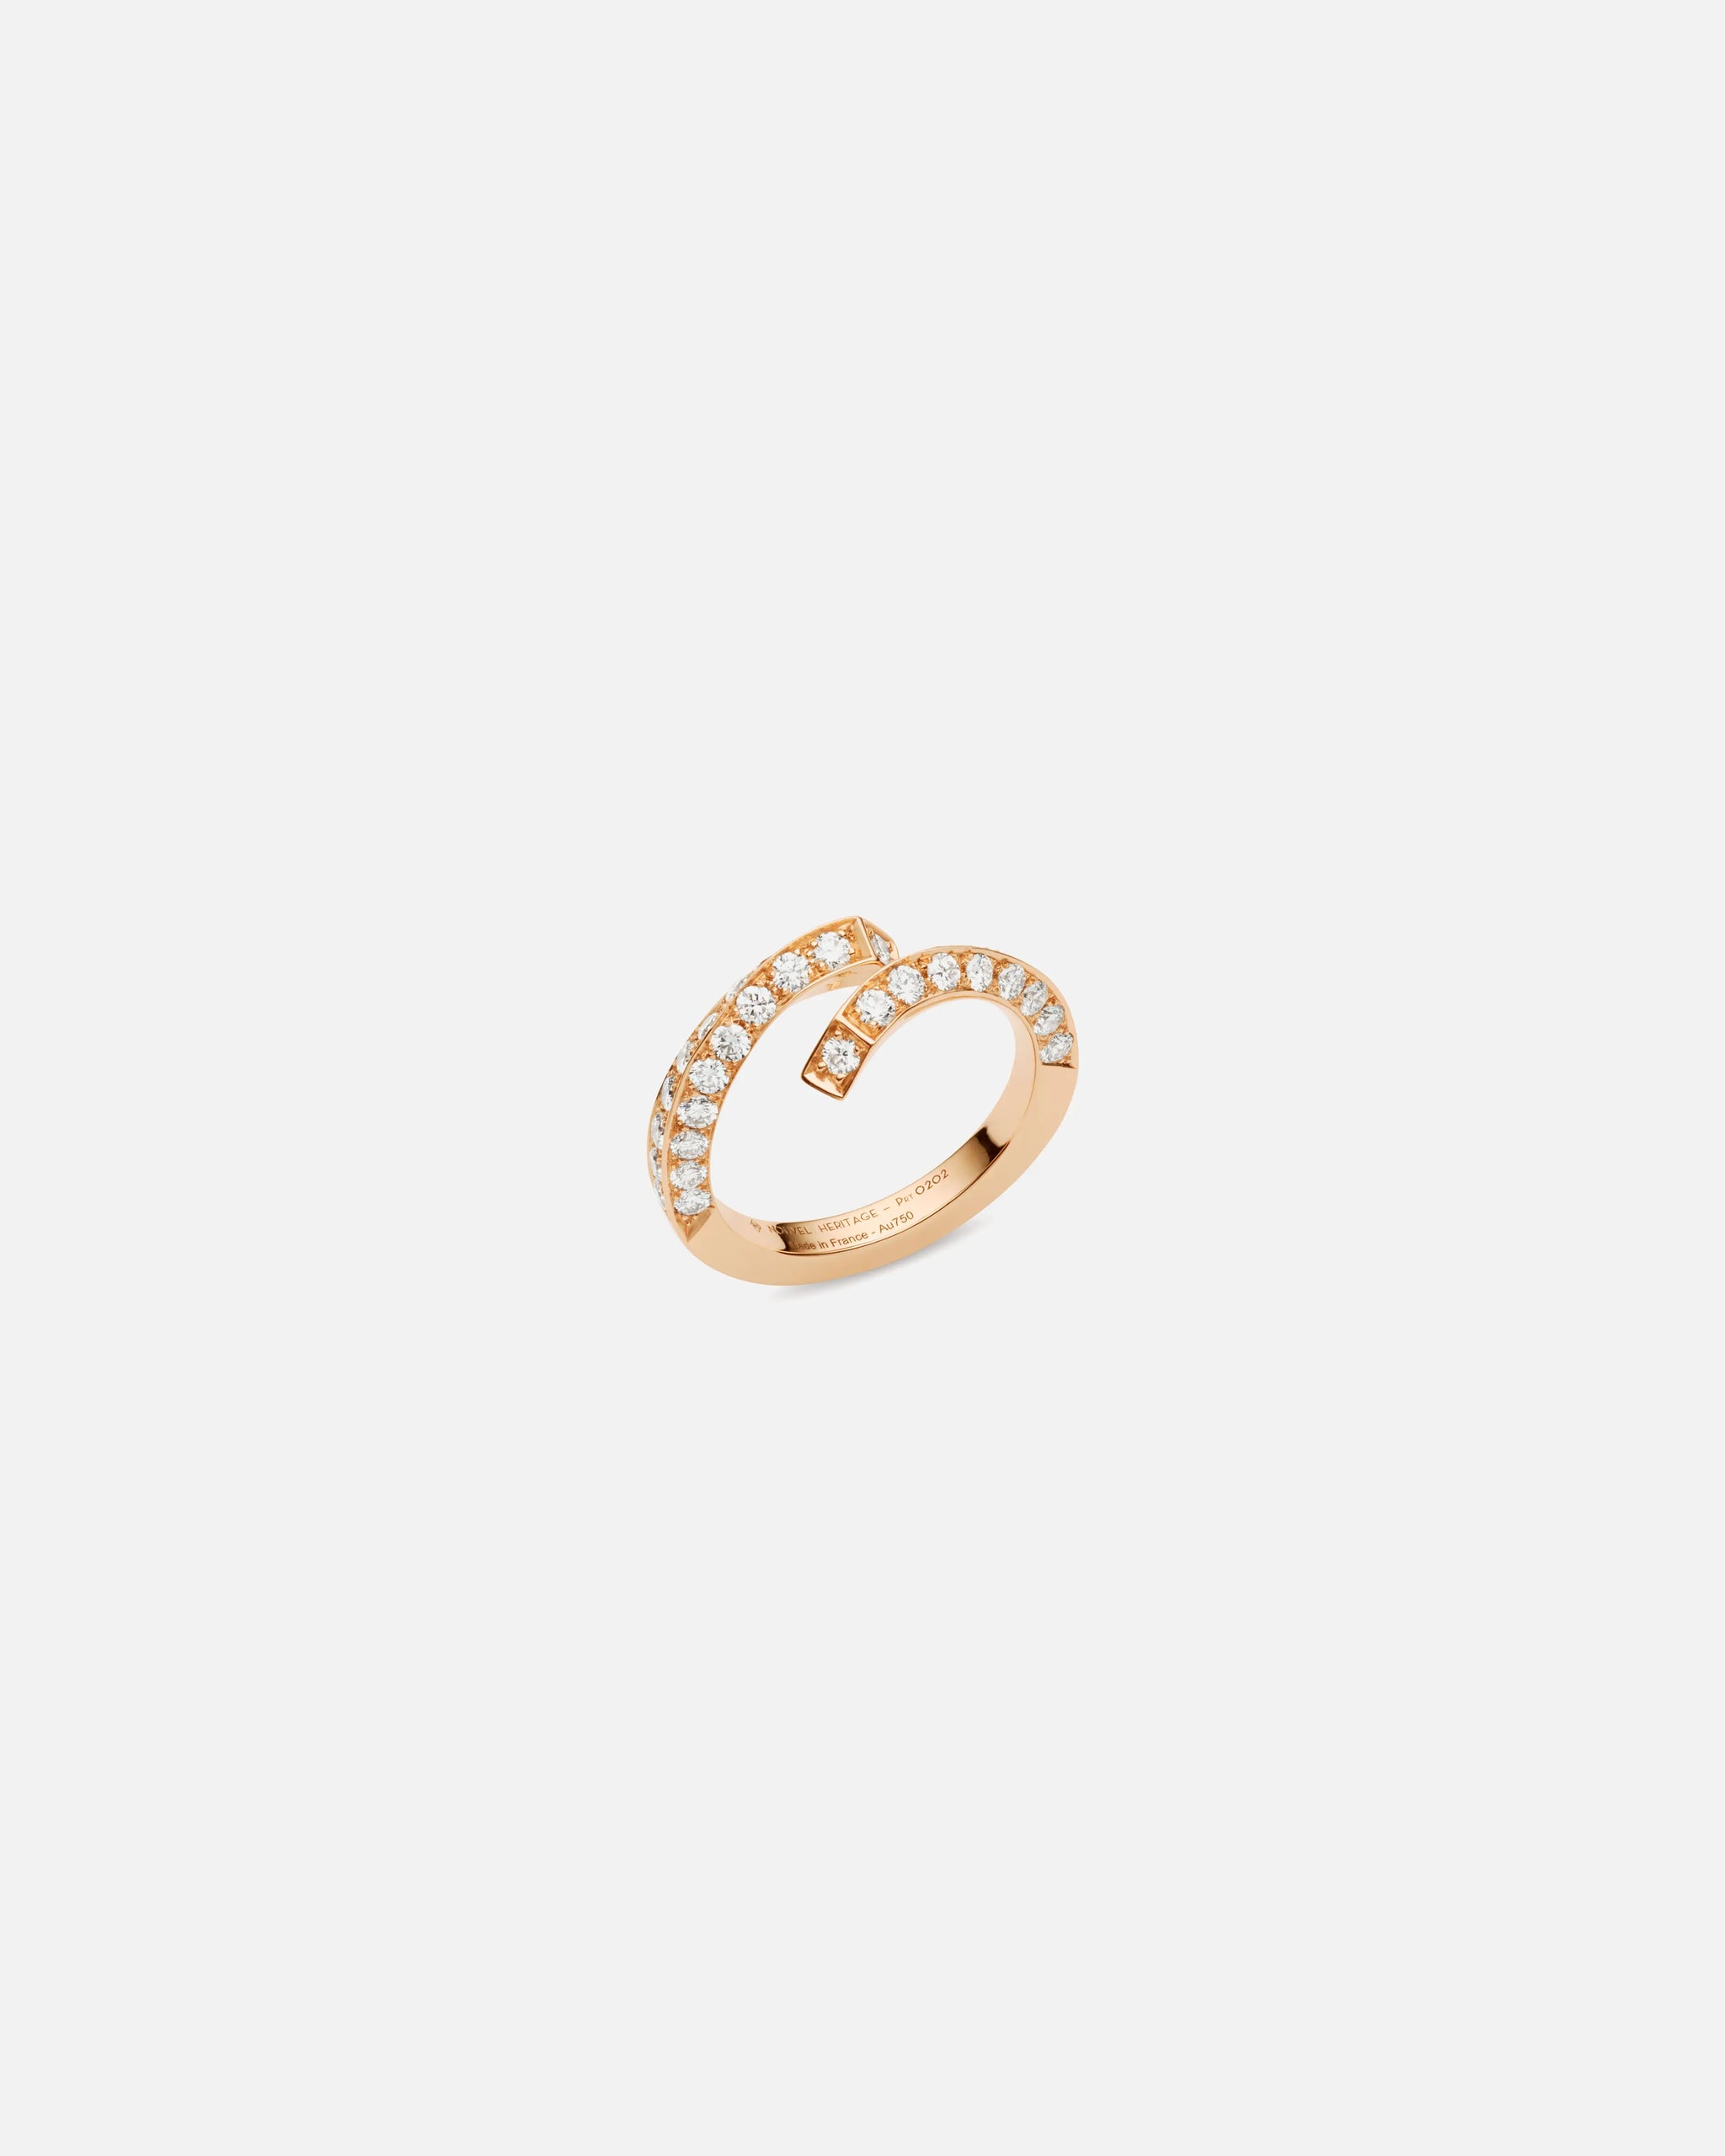 Diamond Thread Ring in Rose Gold - 1 - Nouvel Heritage